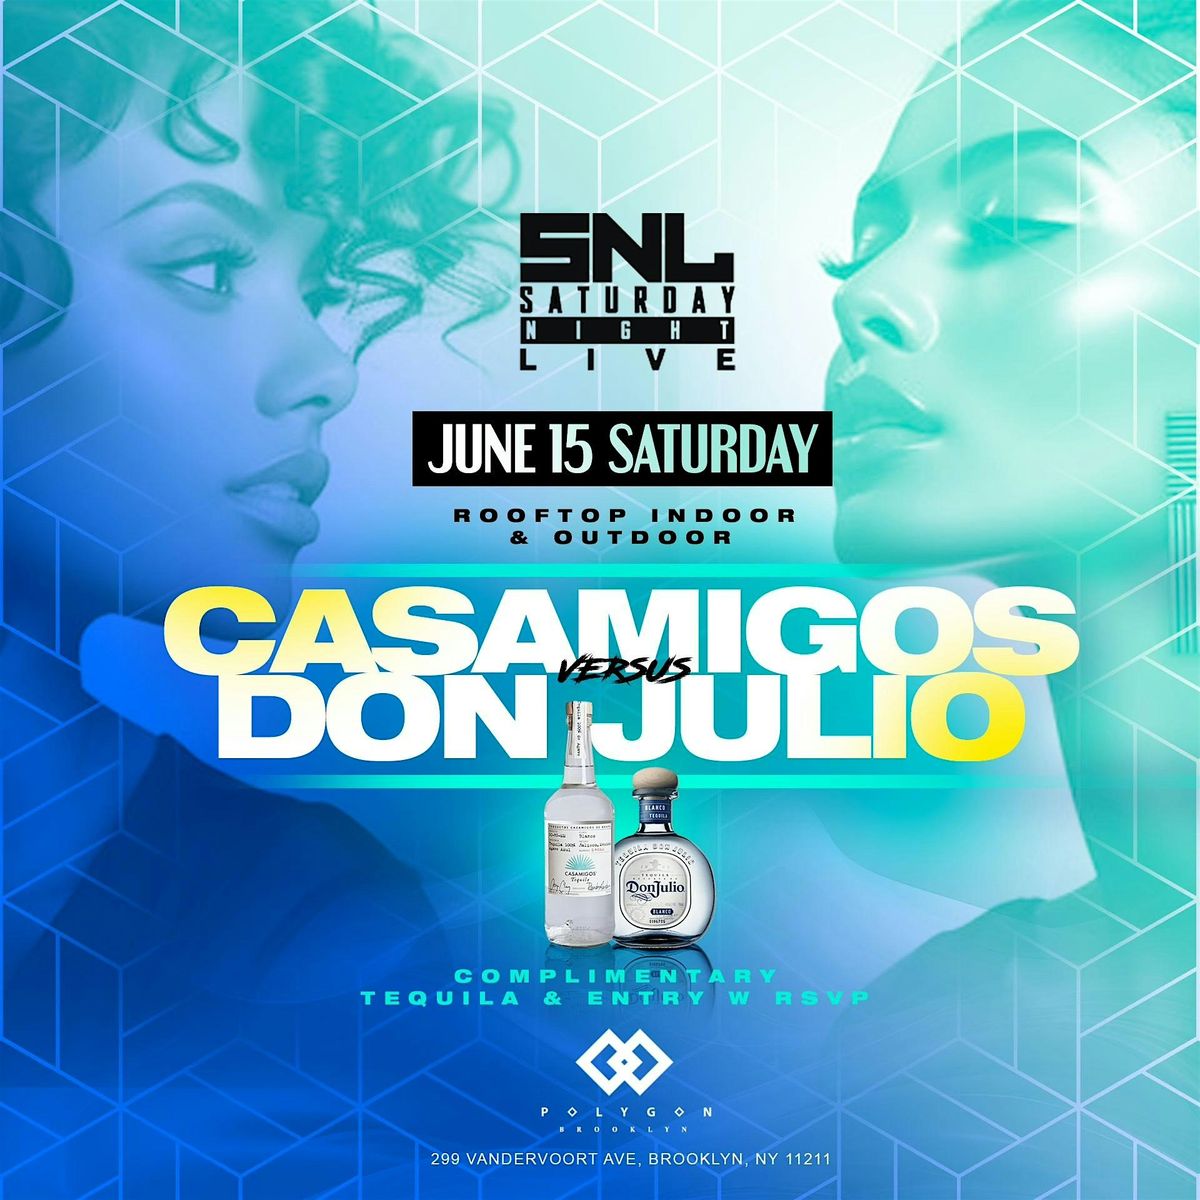 Casamigos vs Don Julio @ Polygon BK 2 Floors with Rooftop: Free entry